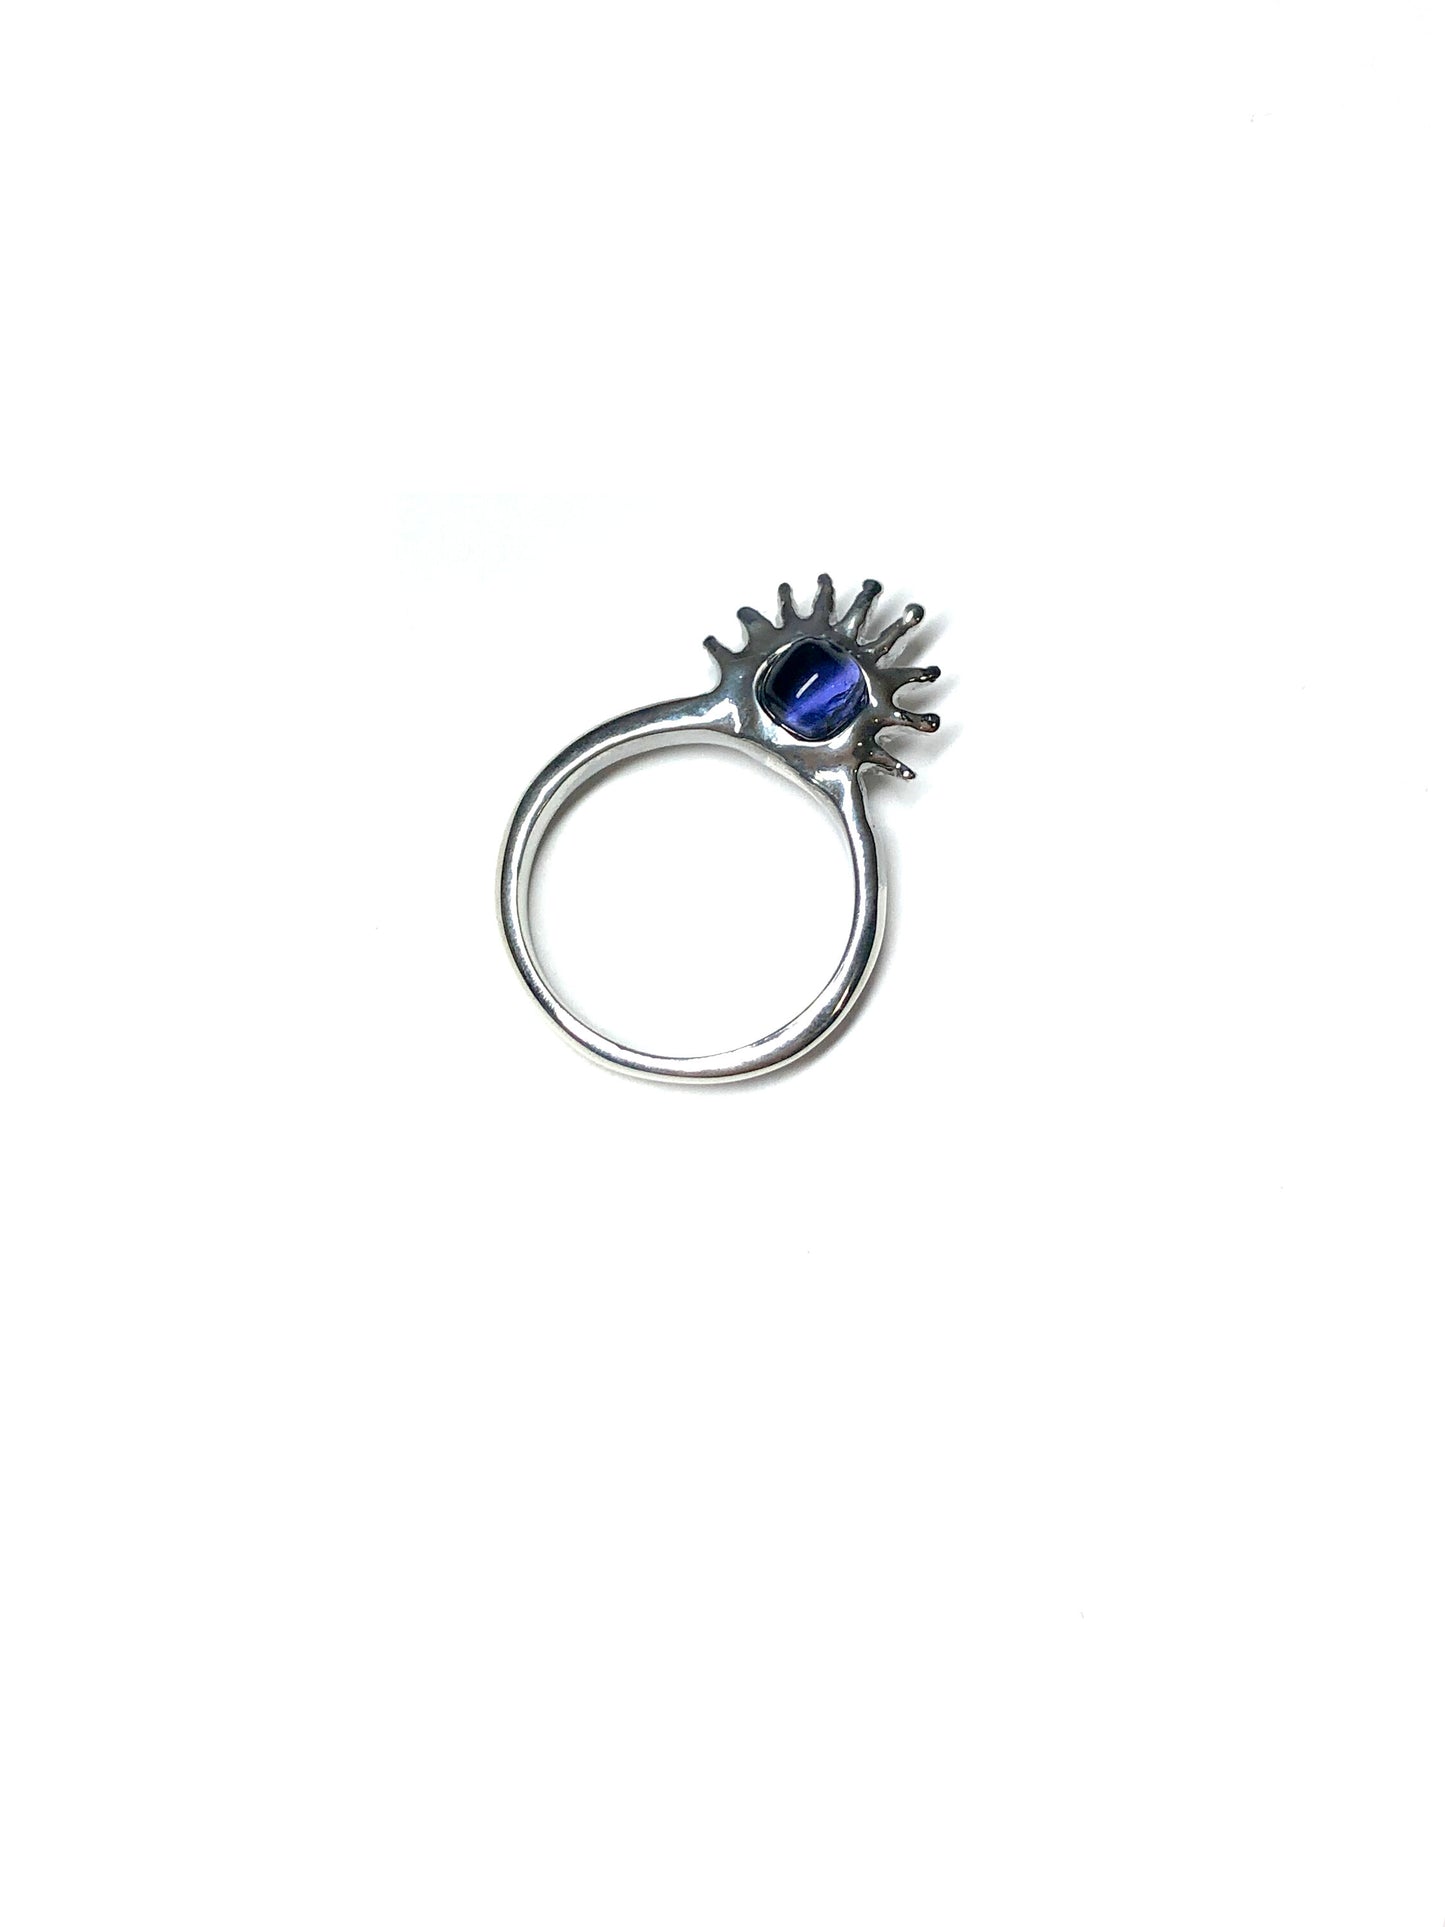 Sol Ring by CLARK in Sterling Silver. This one-of-a-kind hand craft item features a purple gemstone set with high quality metal sun rays laid on white ground. This is a unique ring, a gift for occasion or everyday wear. 